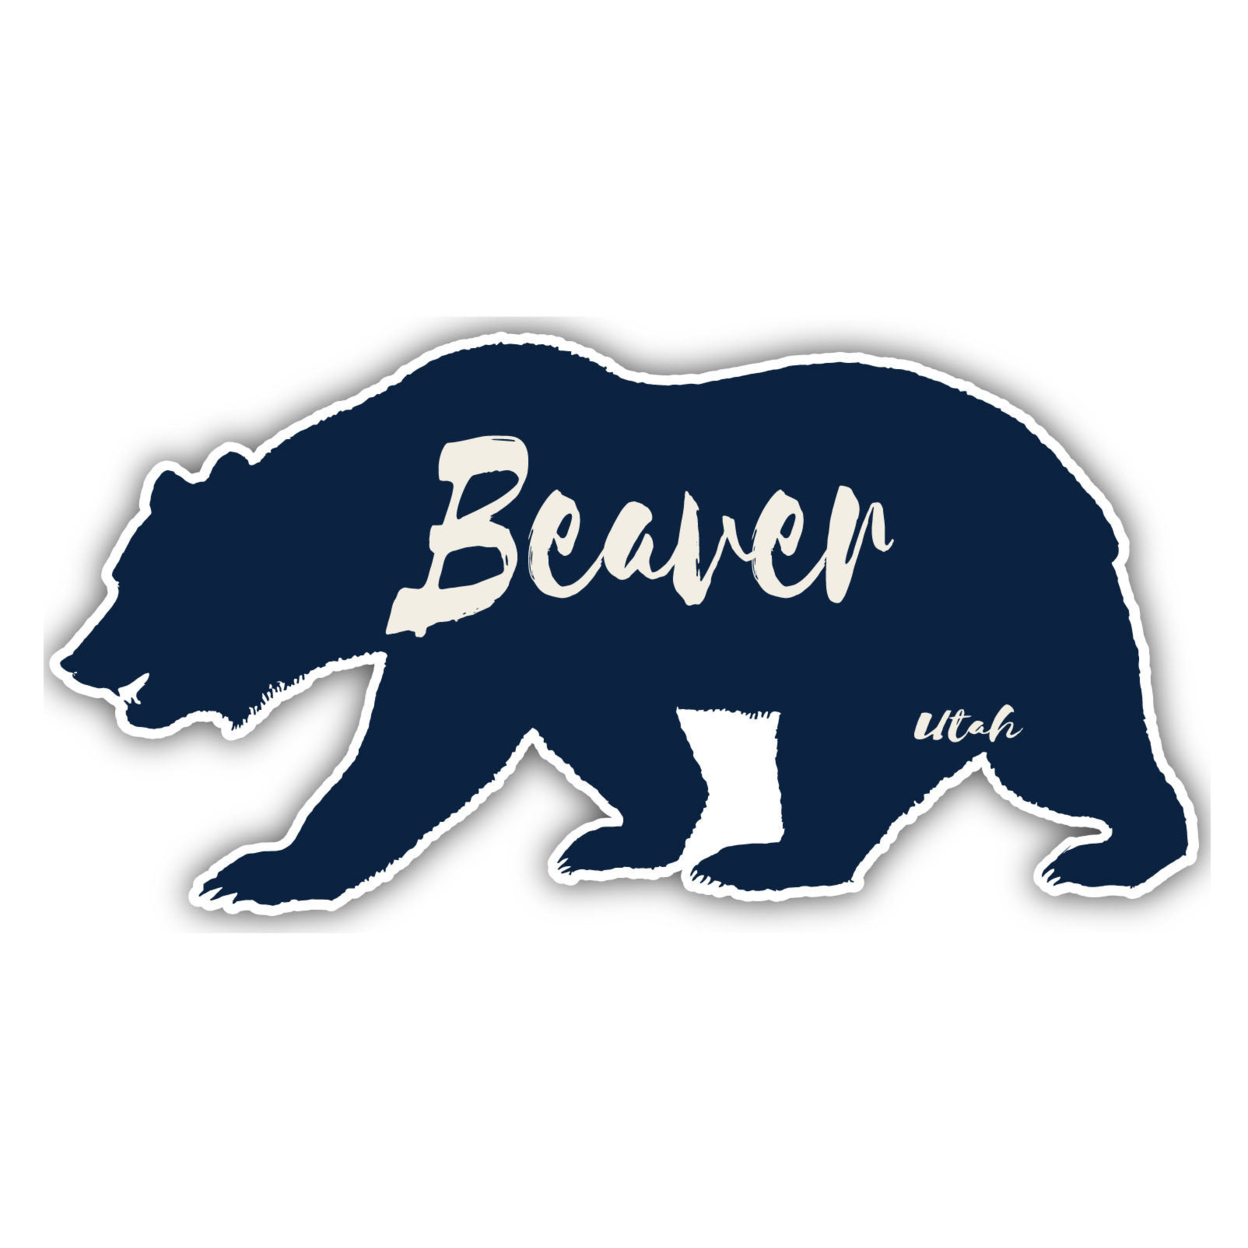 Beaver Utah Souvenir Decorative Stickers (Choose Theme And Size) - 4-Pack, 2-Inch, Tent